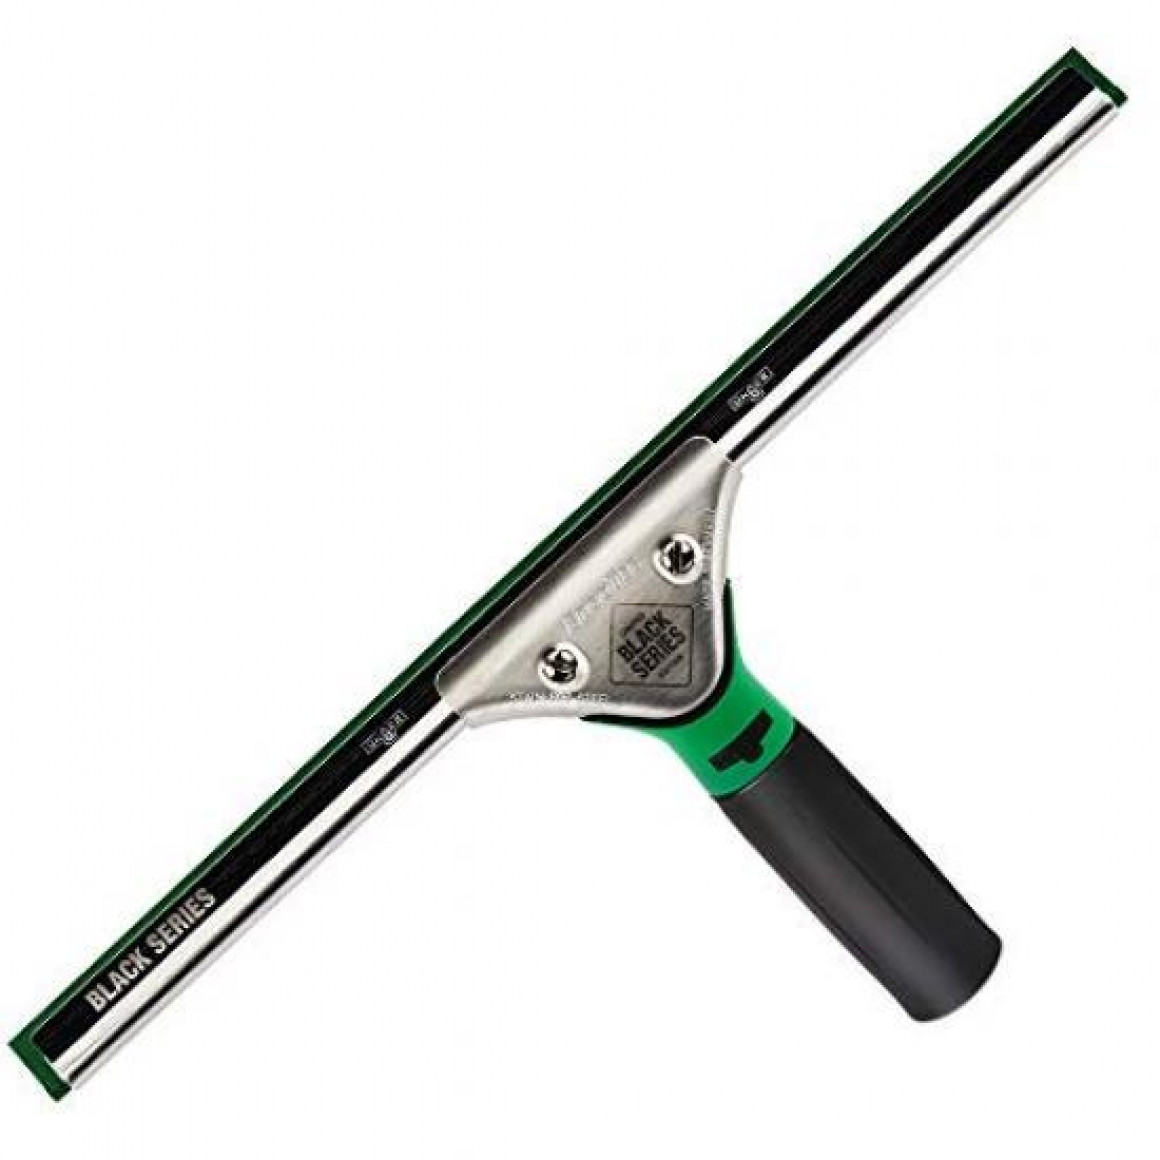 ErgoTec®-Squeegee with rubber HARD/L35